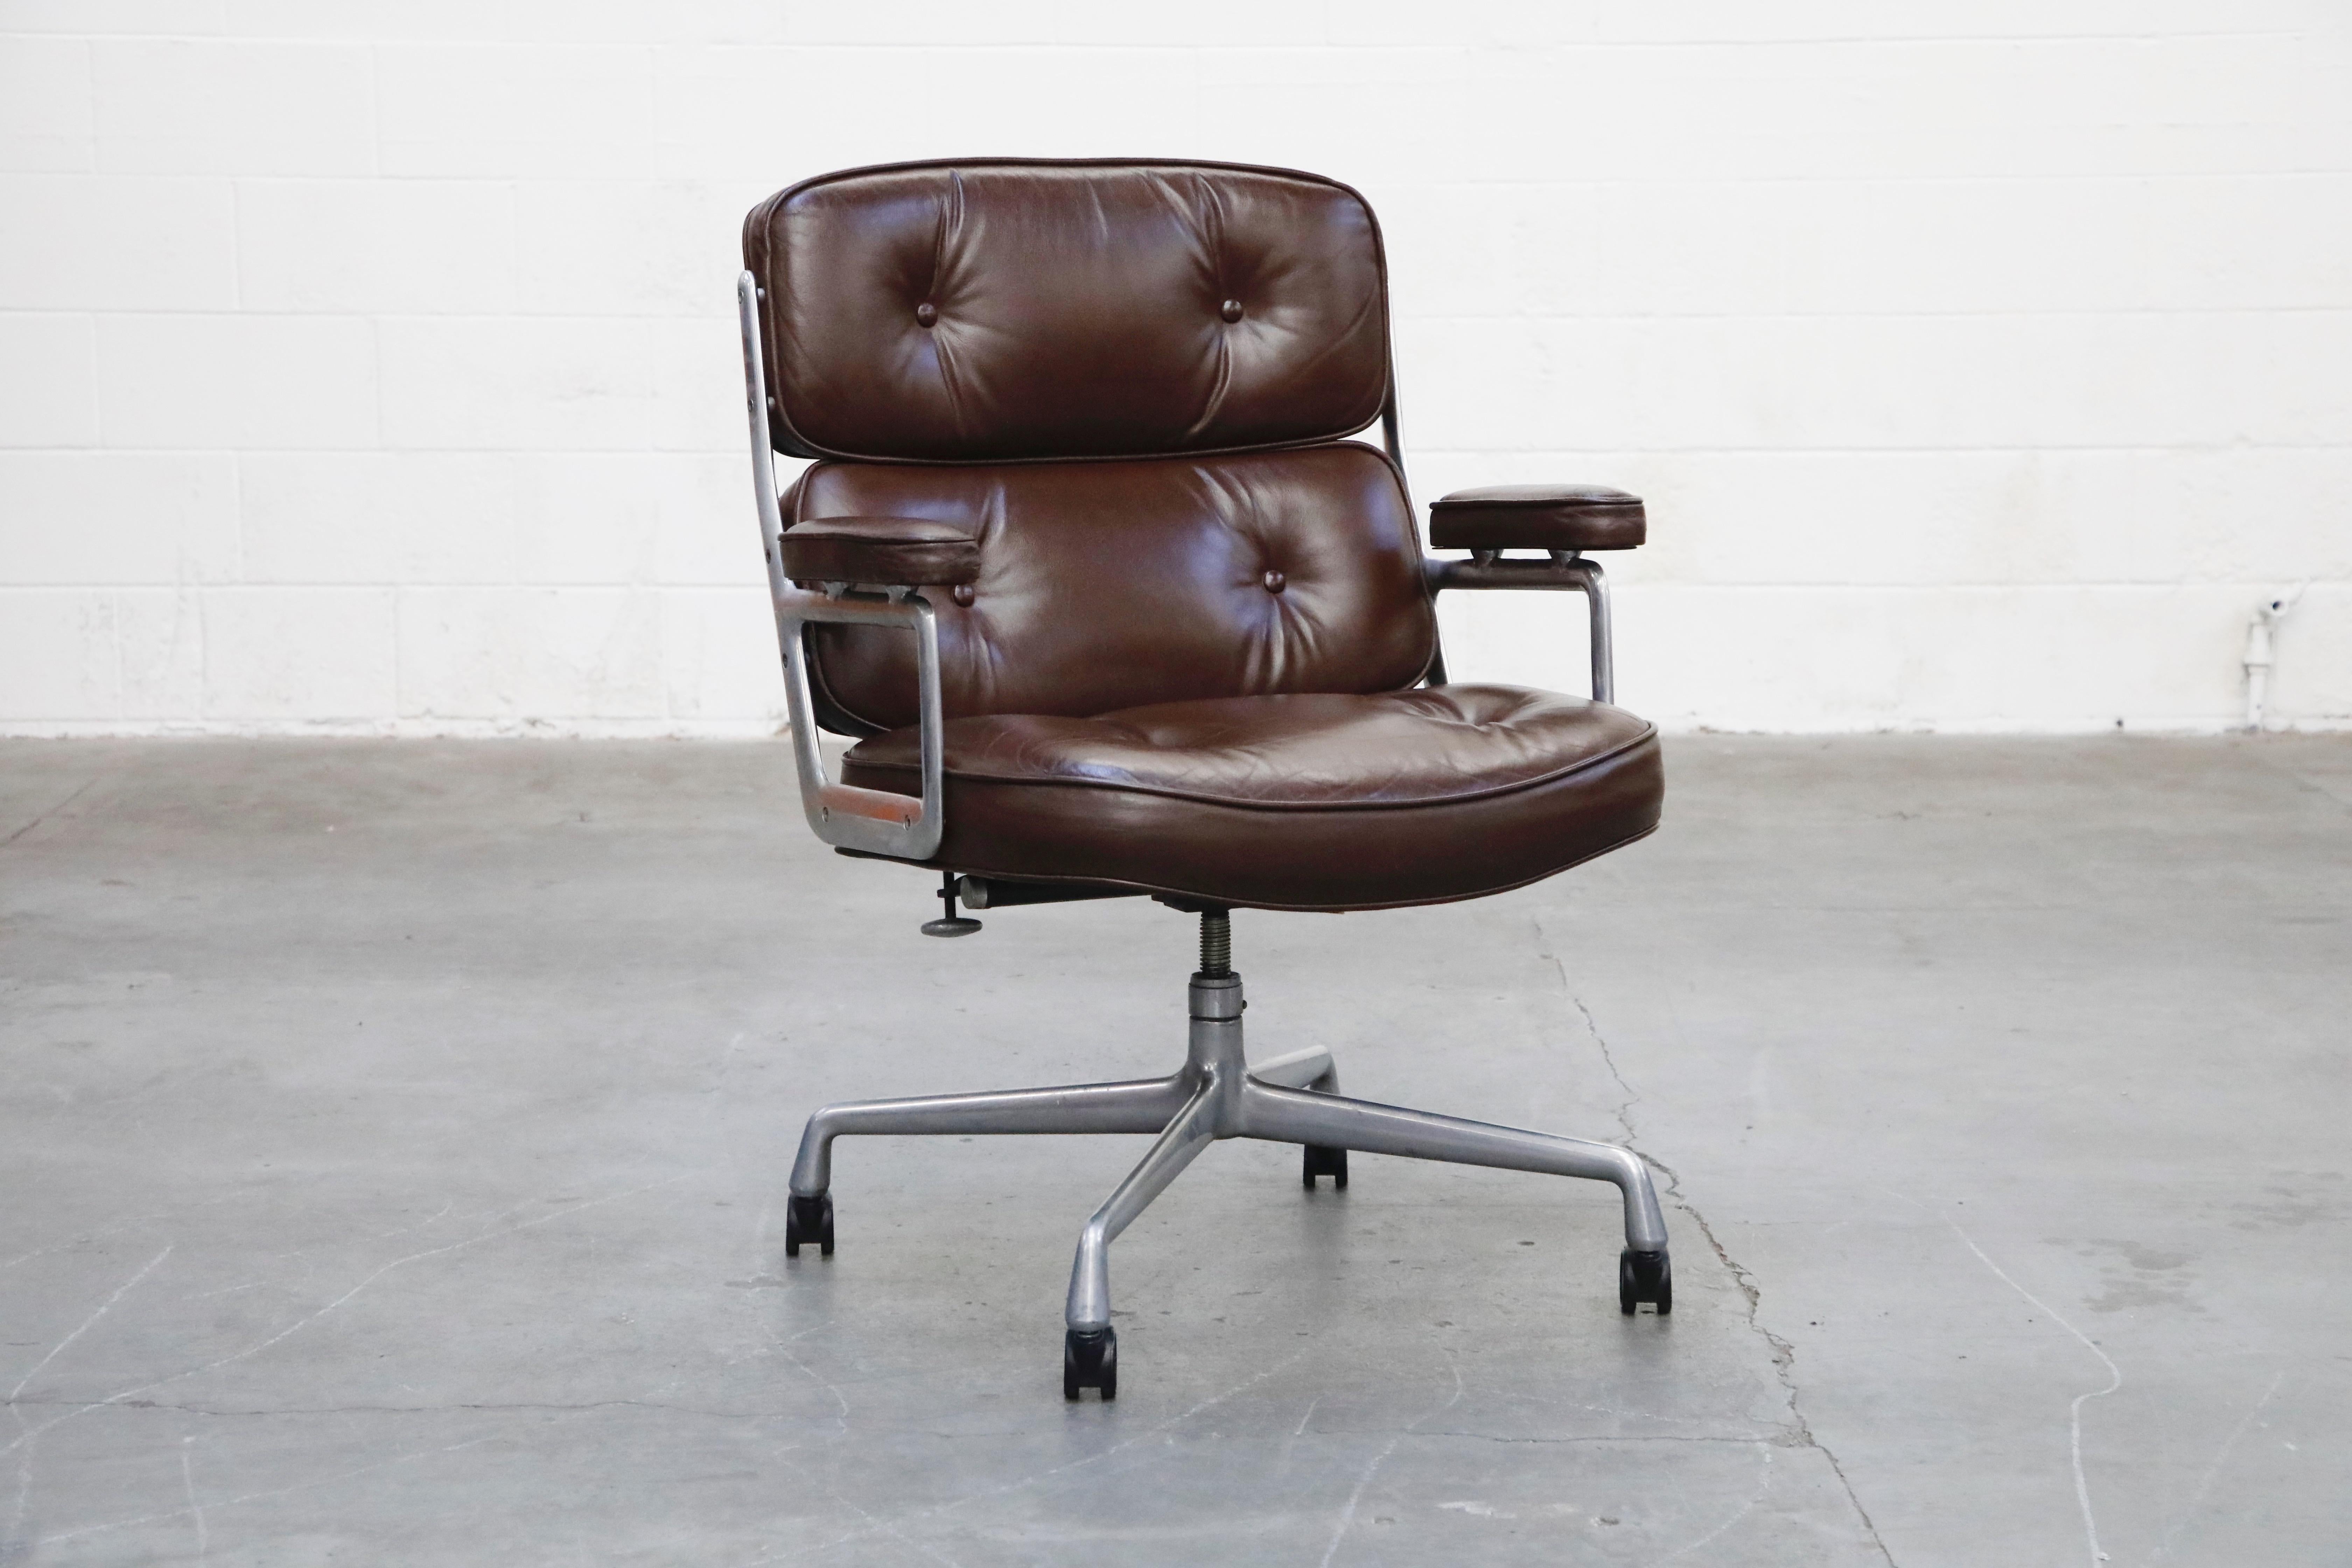 These incredible deep brown leather 'Time Life' executive swivel desk chairs were designed by Charles and Ray Eames in 1959 and manufactured by Herman Miller. Known to be the most comfortable and ergonomic executive chair, these Time Life Executive